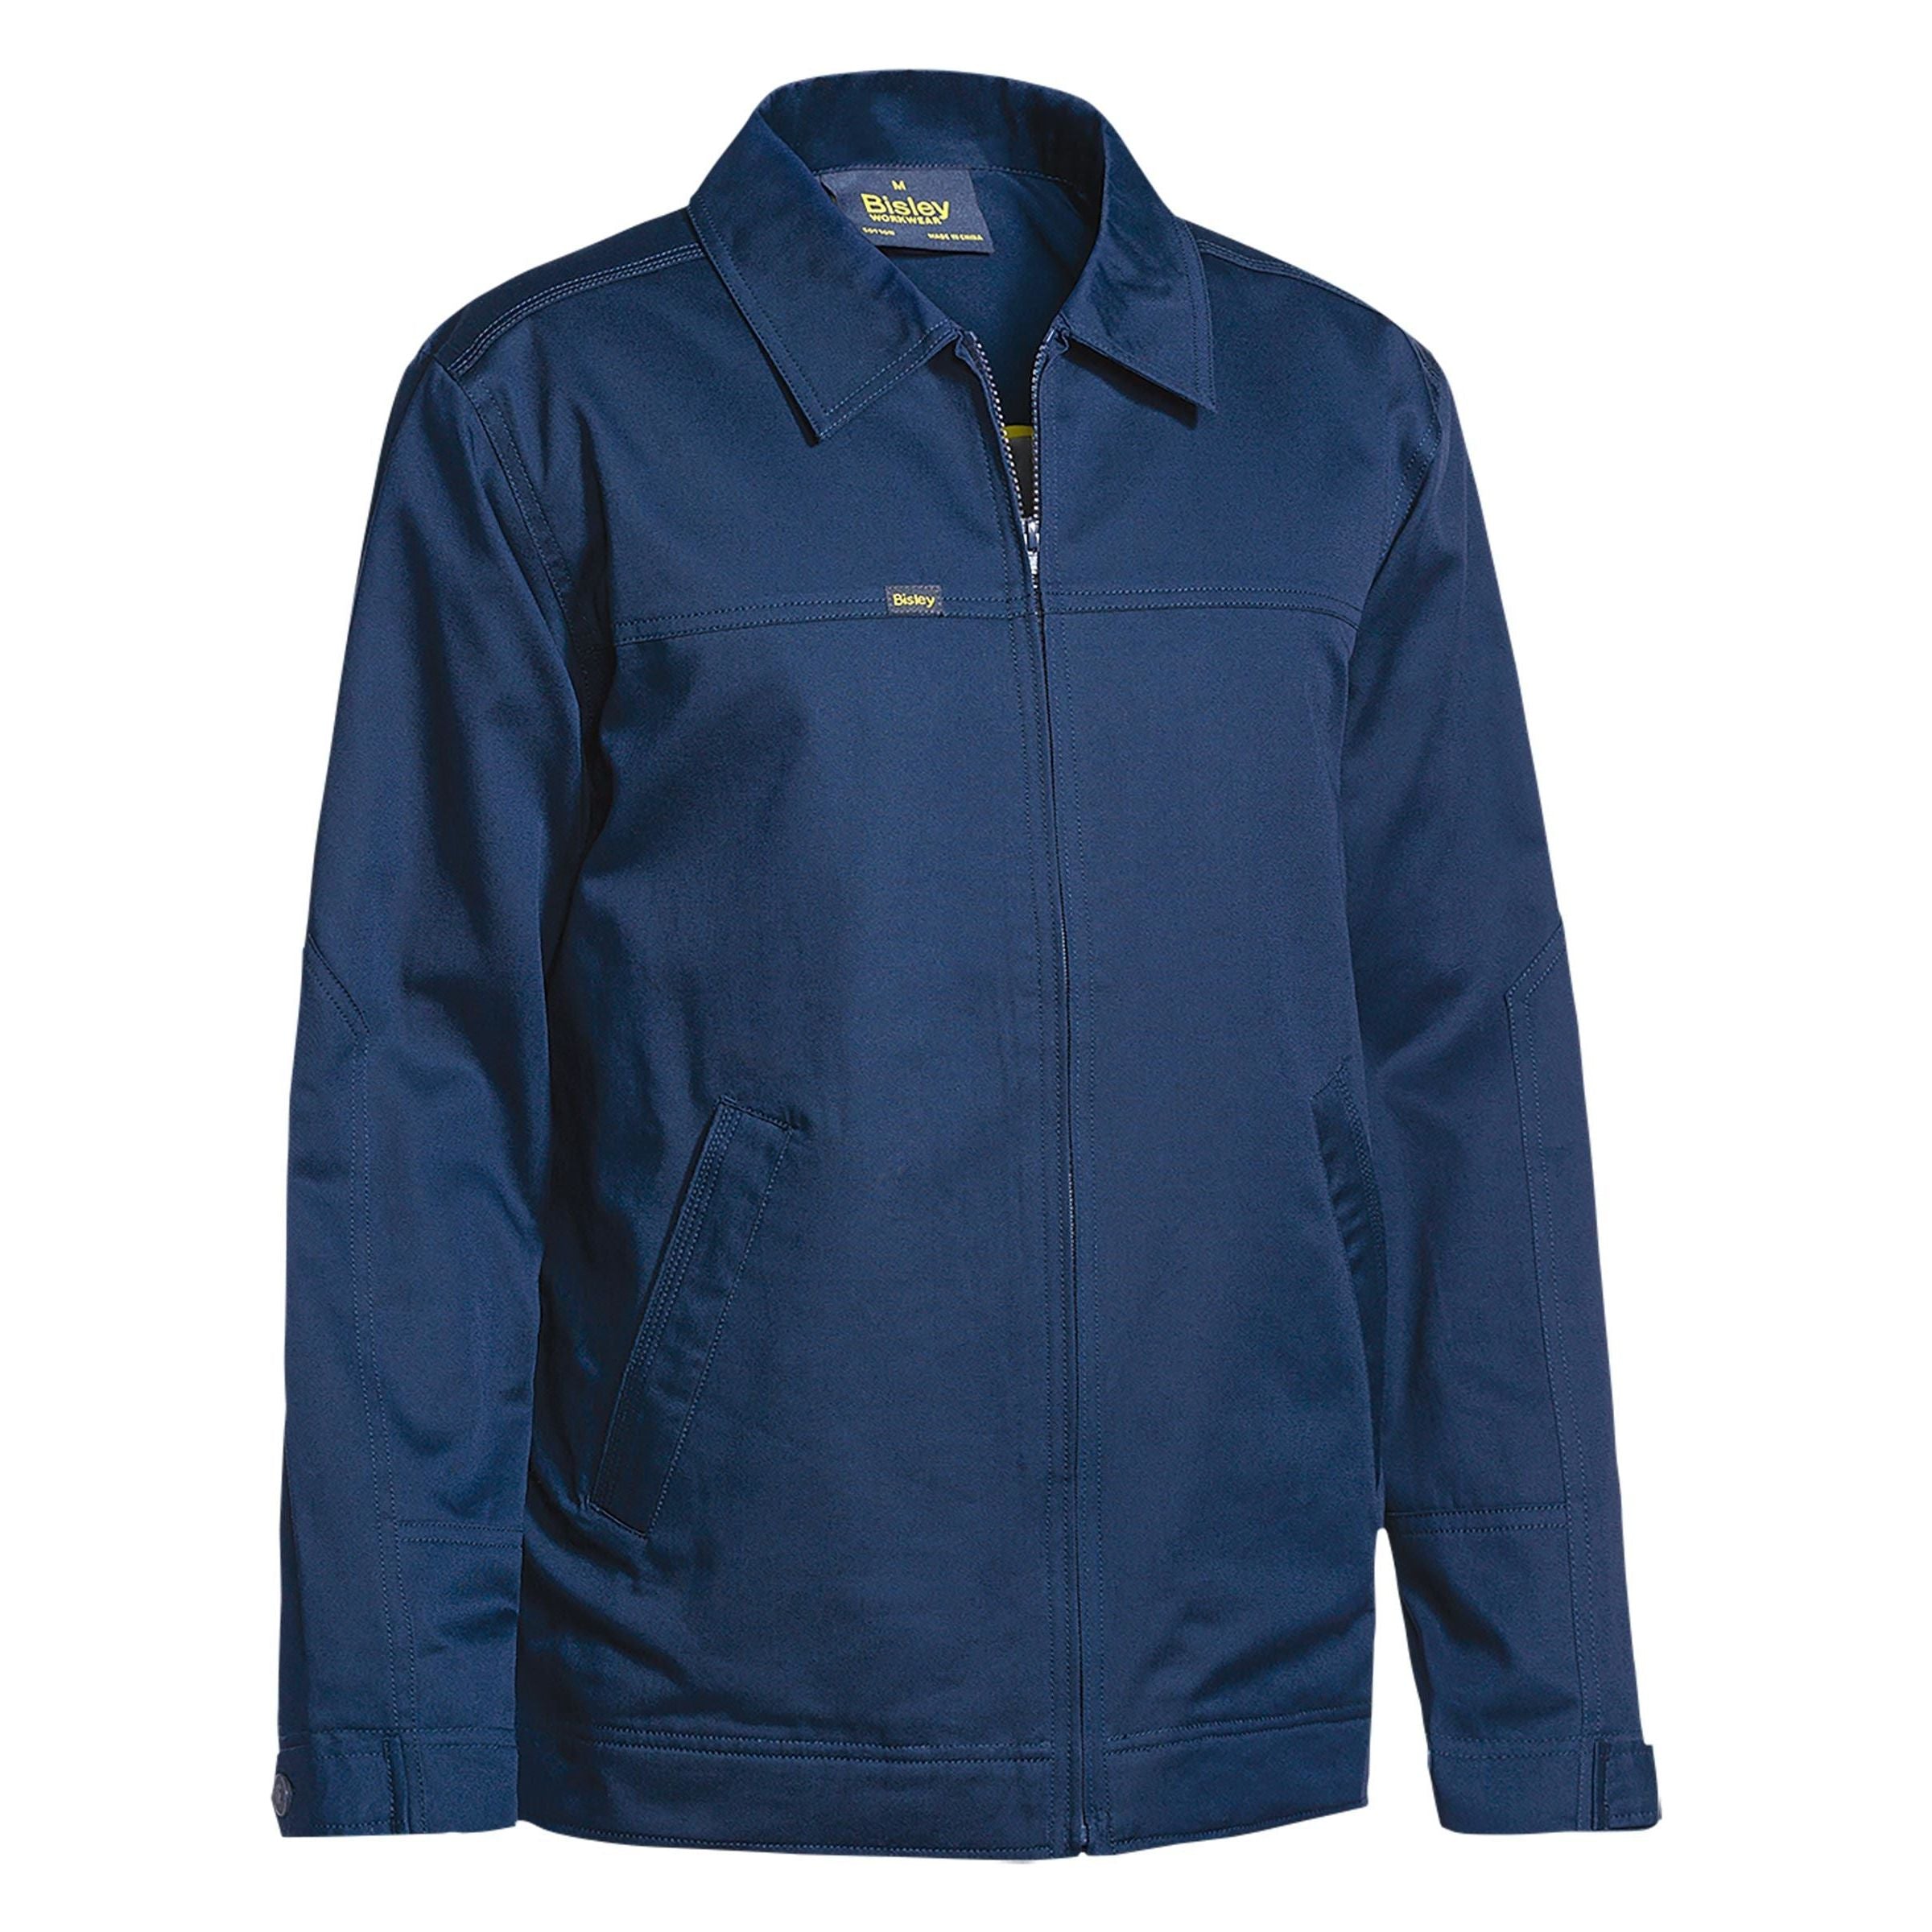 Drill Jacket With Liquid Repellent Finish - BJ6916